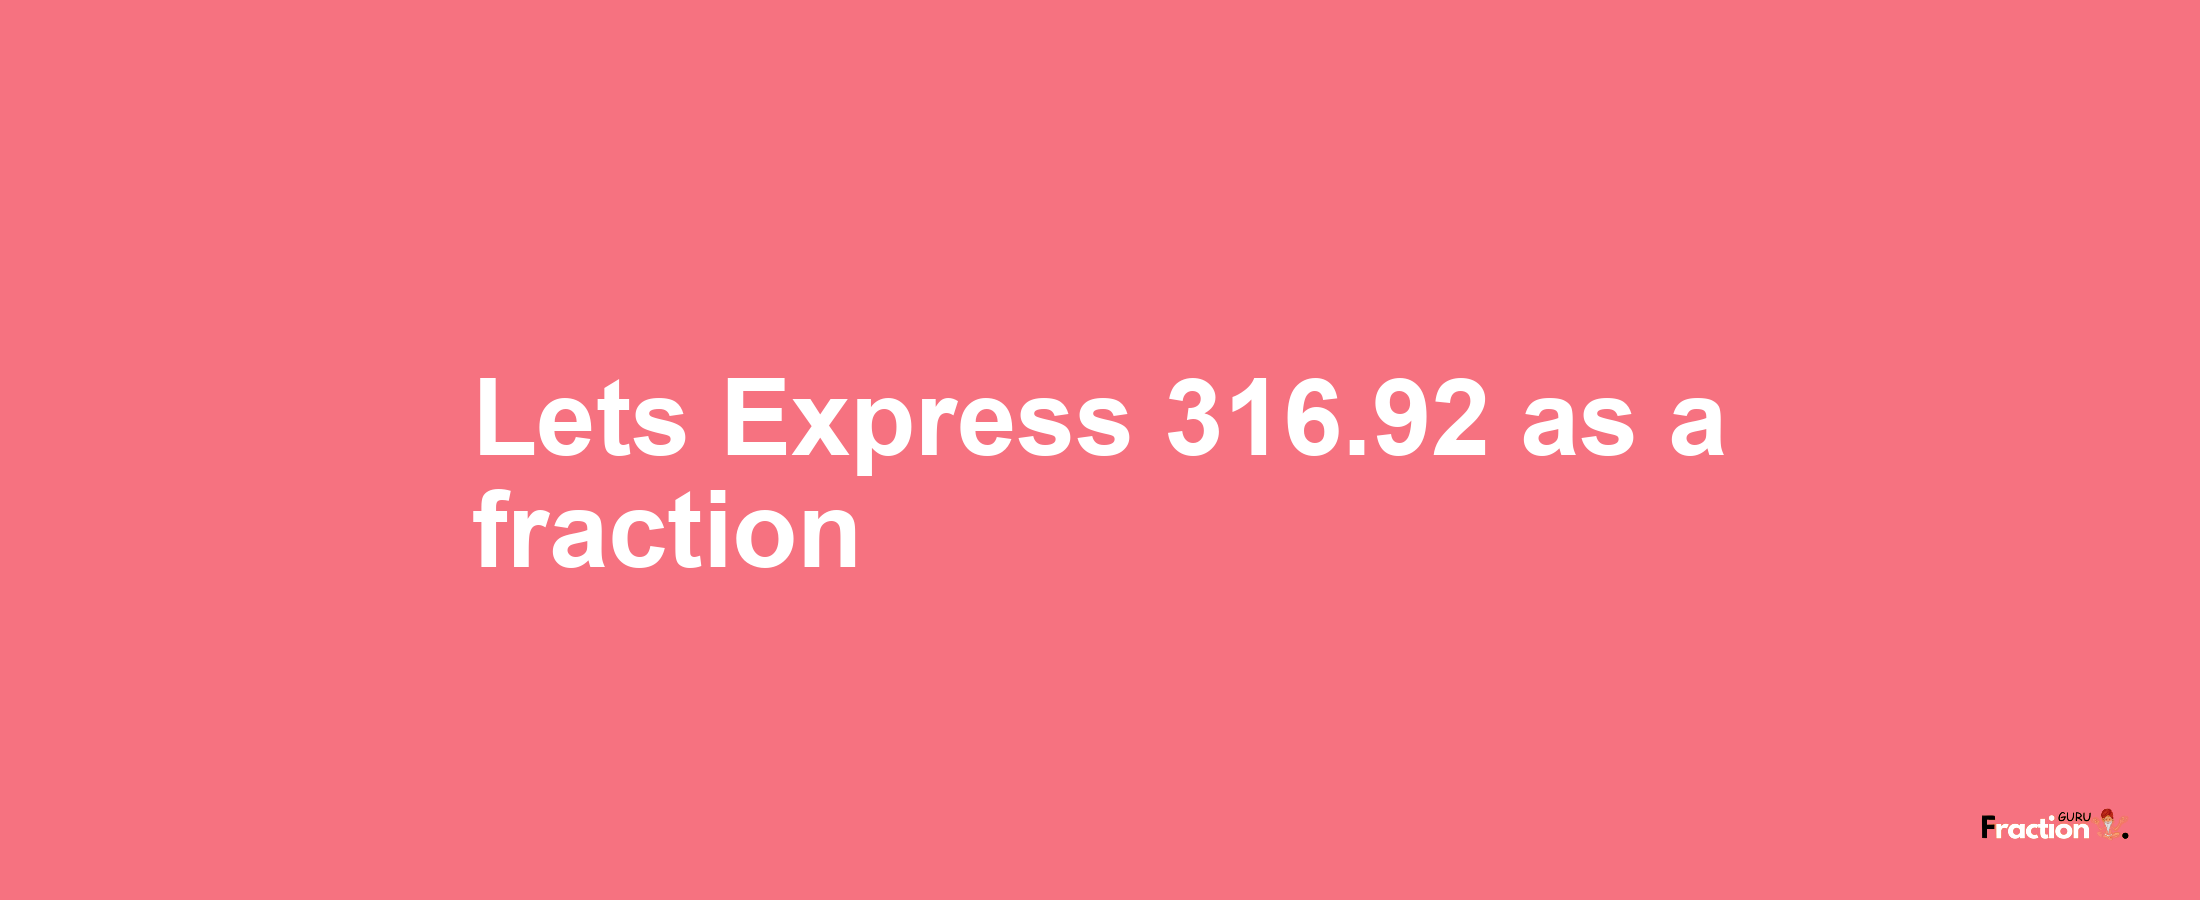 Lets Express 316.92 as afraction